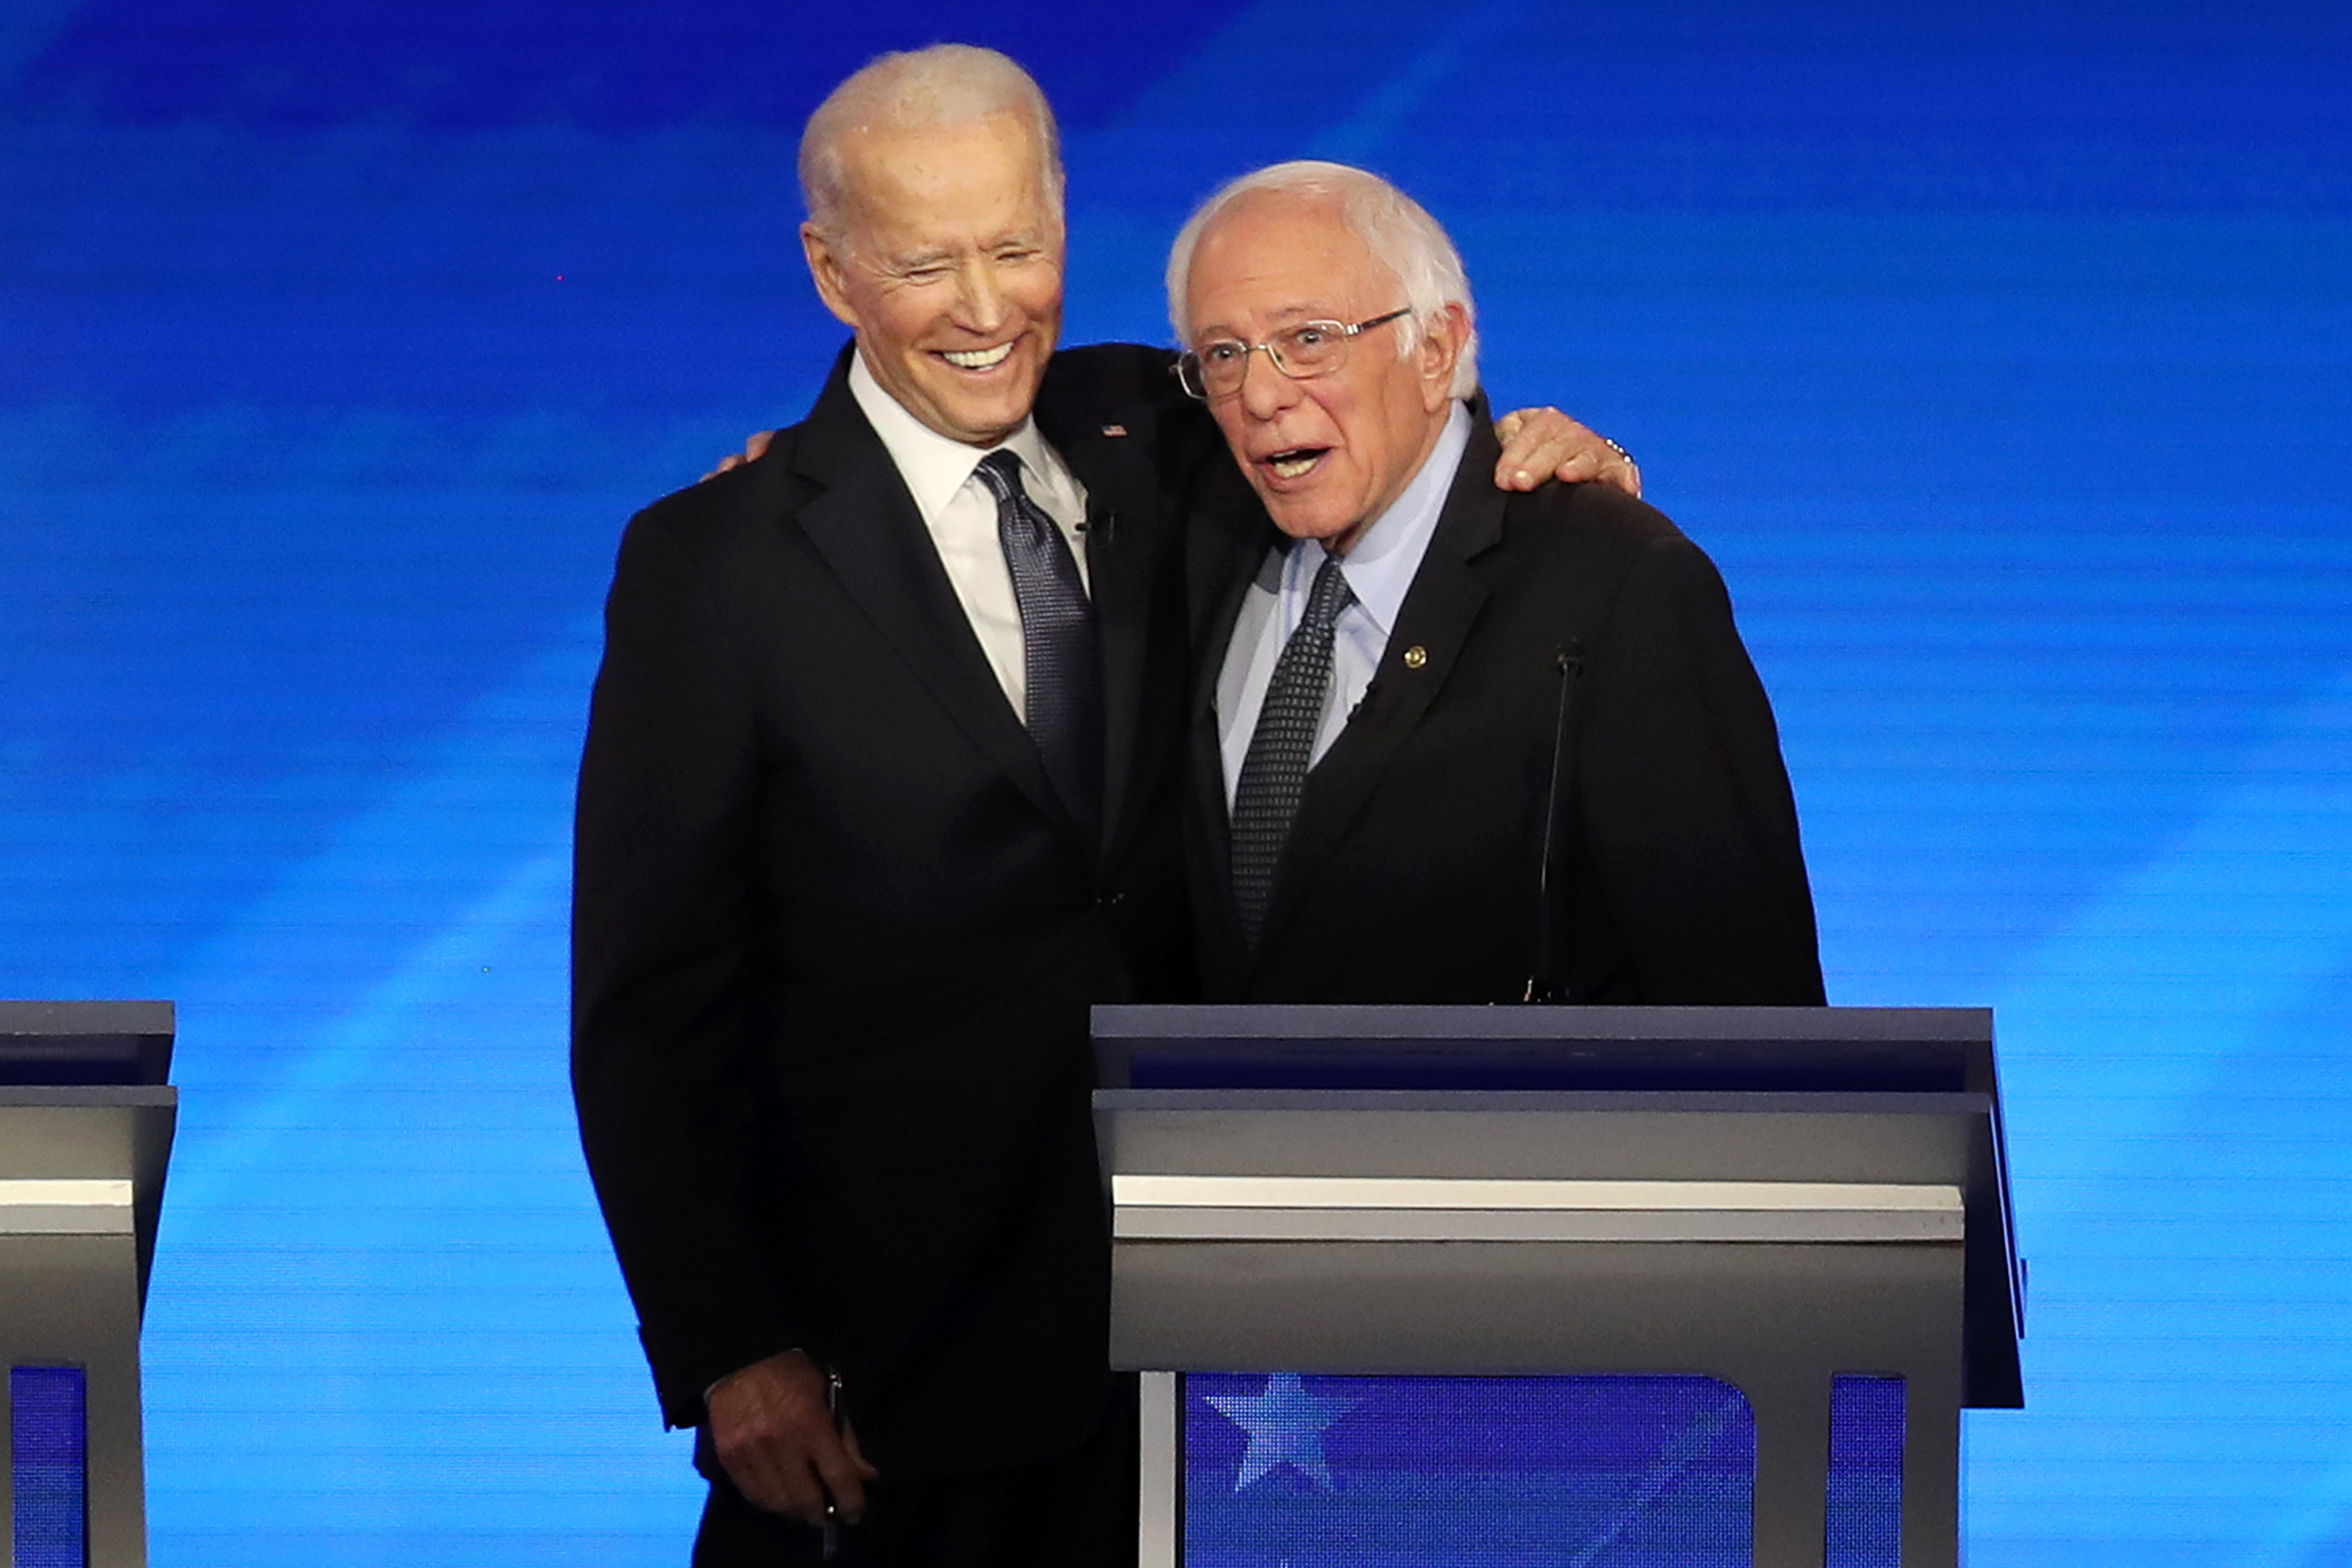 Then-presidential candidates Joe Biden and Sen. Bernie Sanders share a moment during the Democratic presidential primary debate in Manchester, N.H. on Feb. 7, 2020. (Joe Raedle—Getty Images)